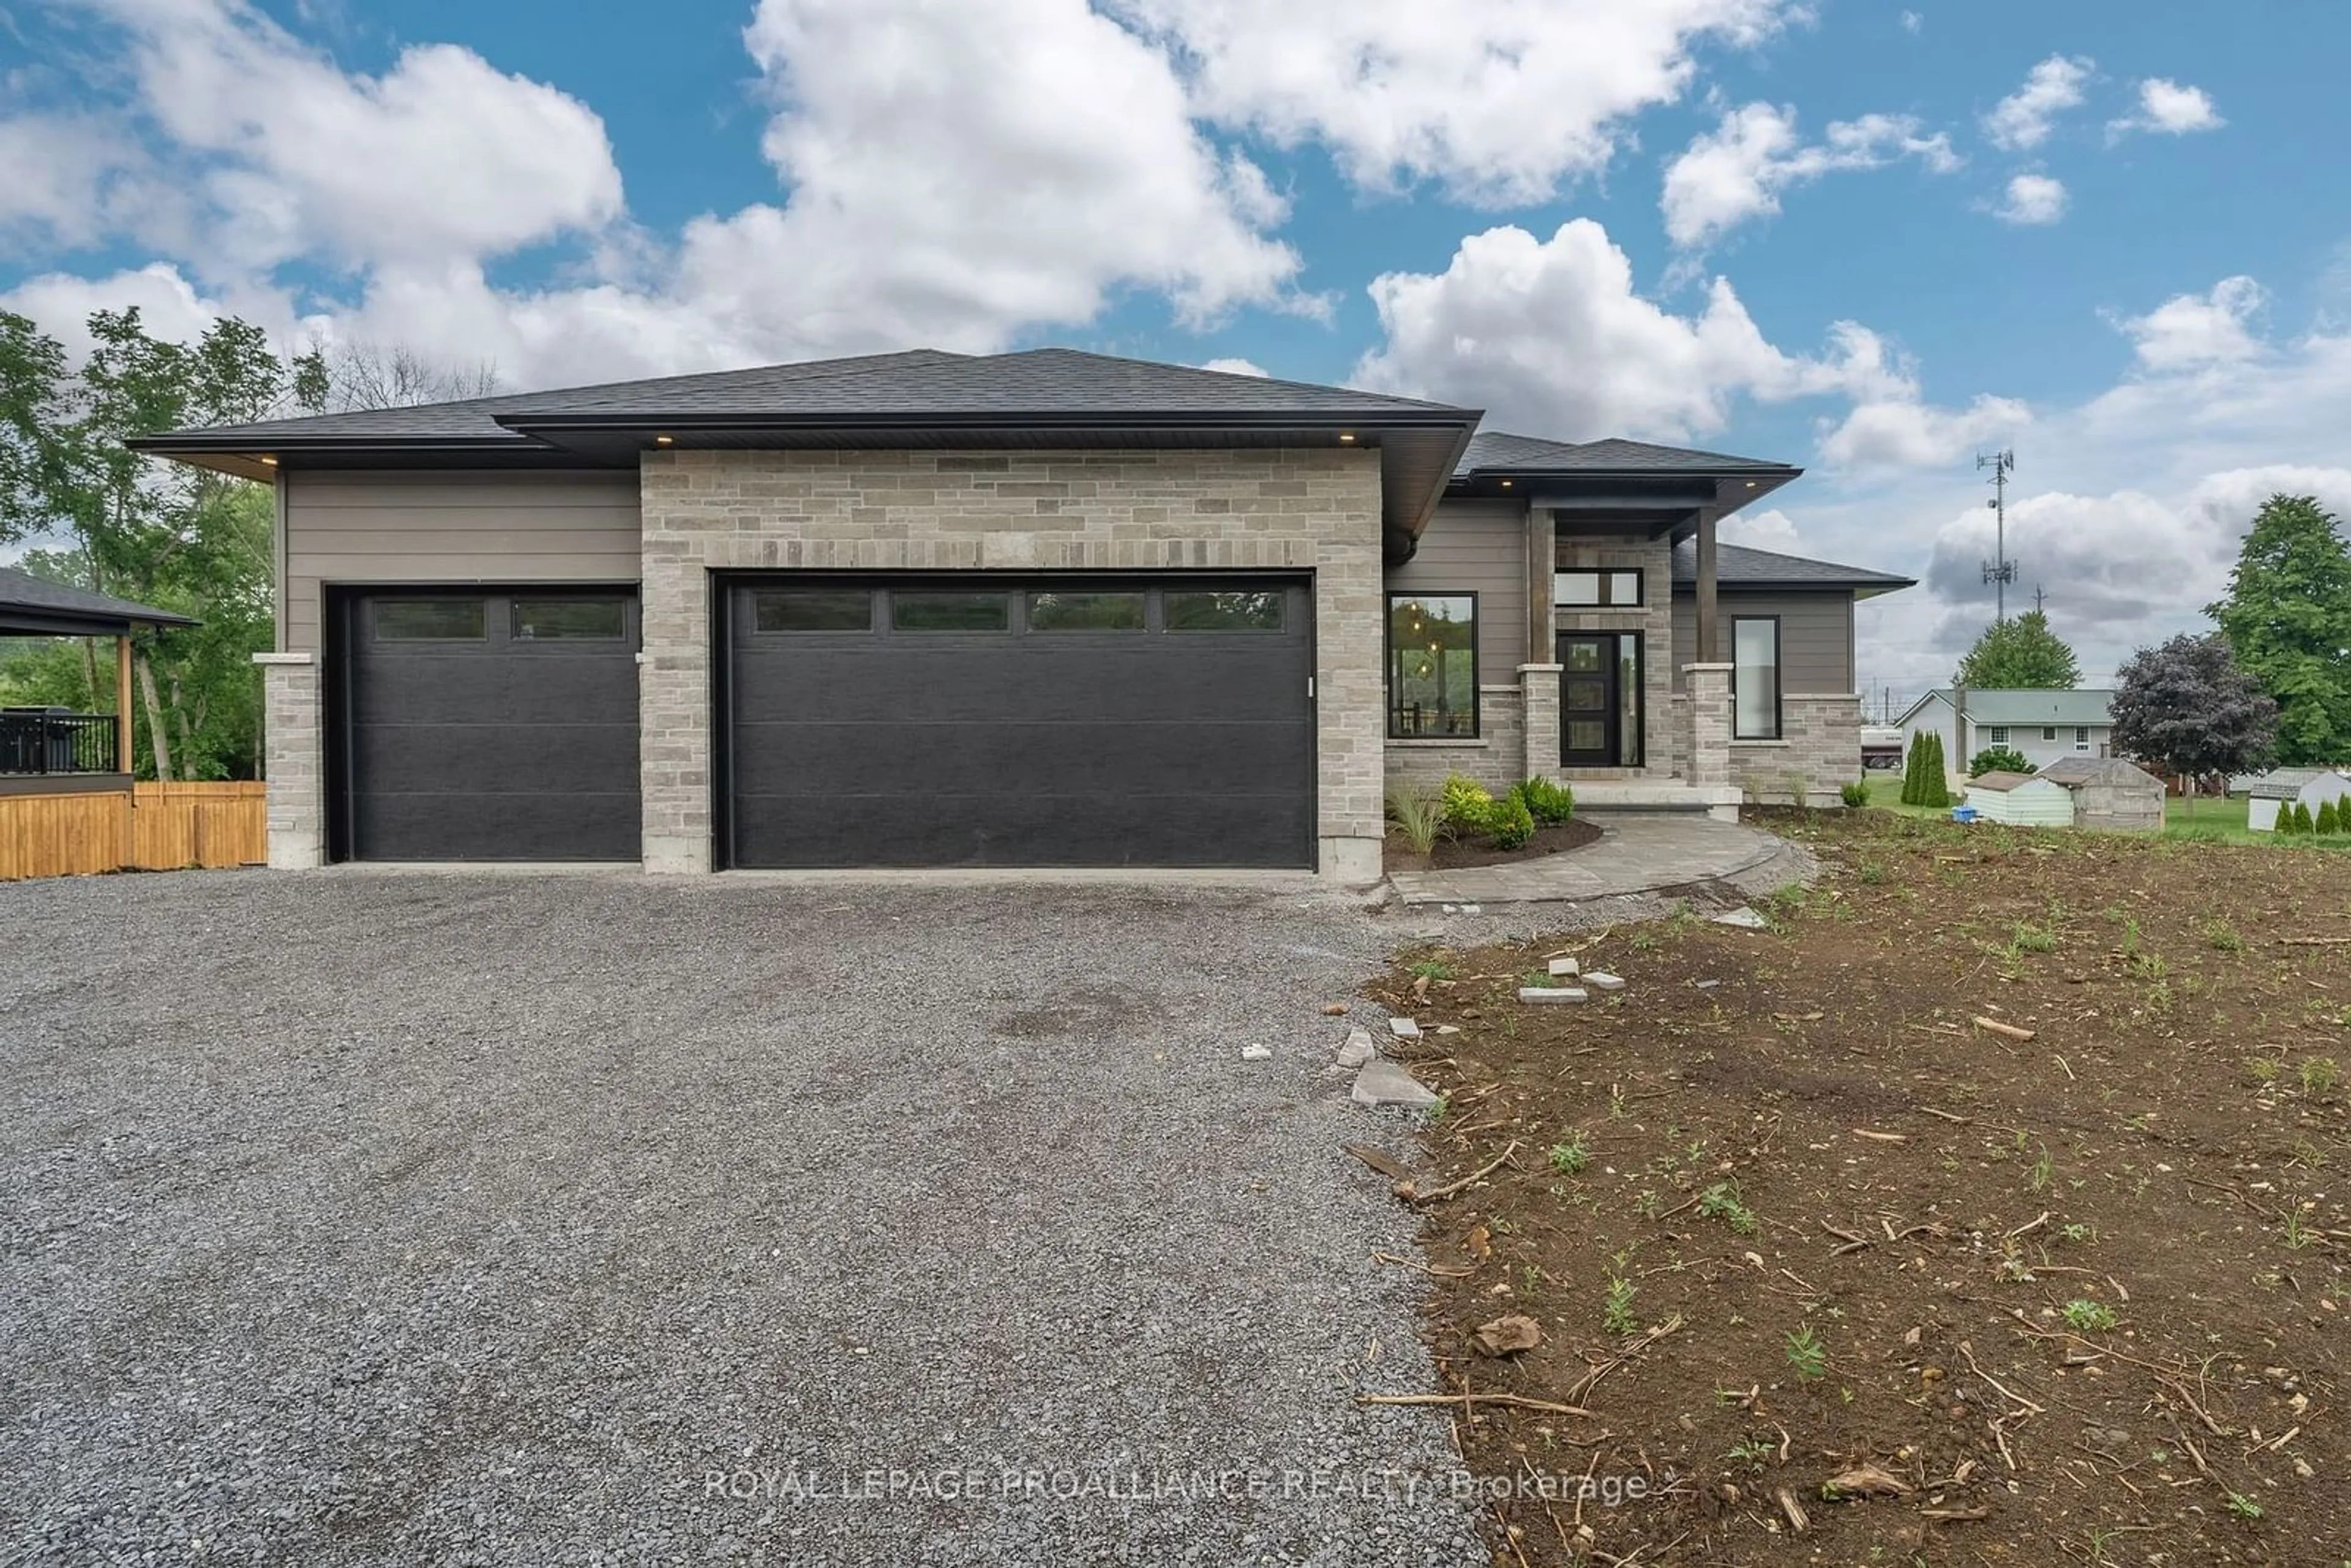 Frontside or backside of a home for 114 Michael's Way, Prince Edward County Ontario K0K 1L0